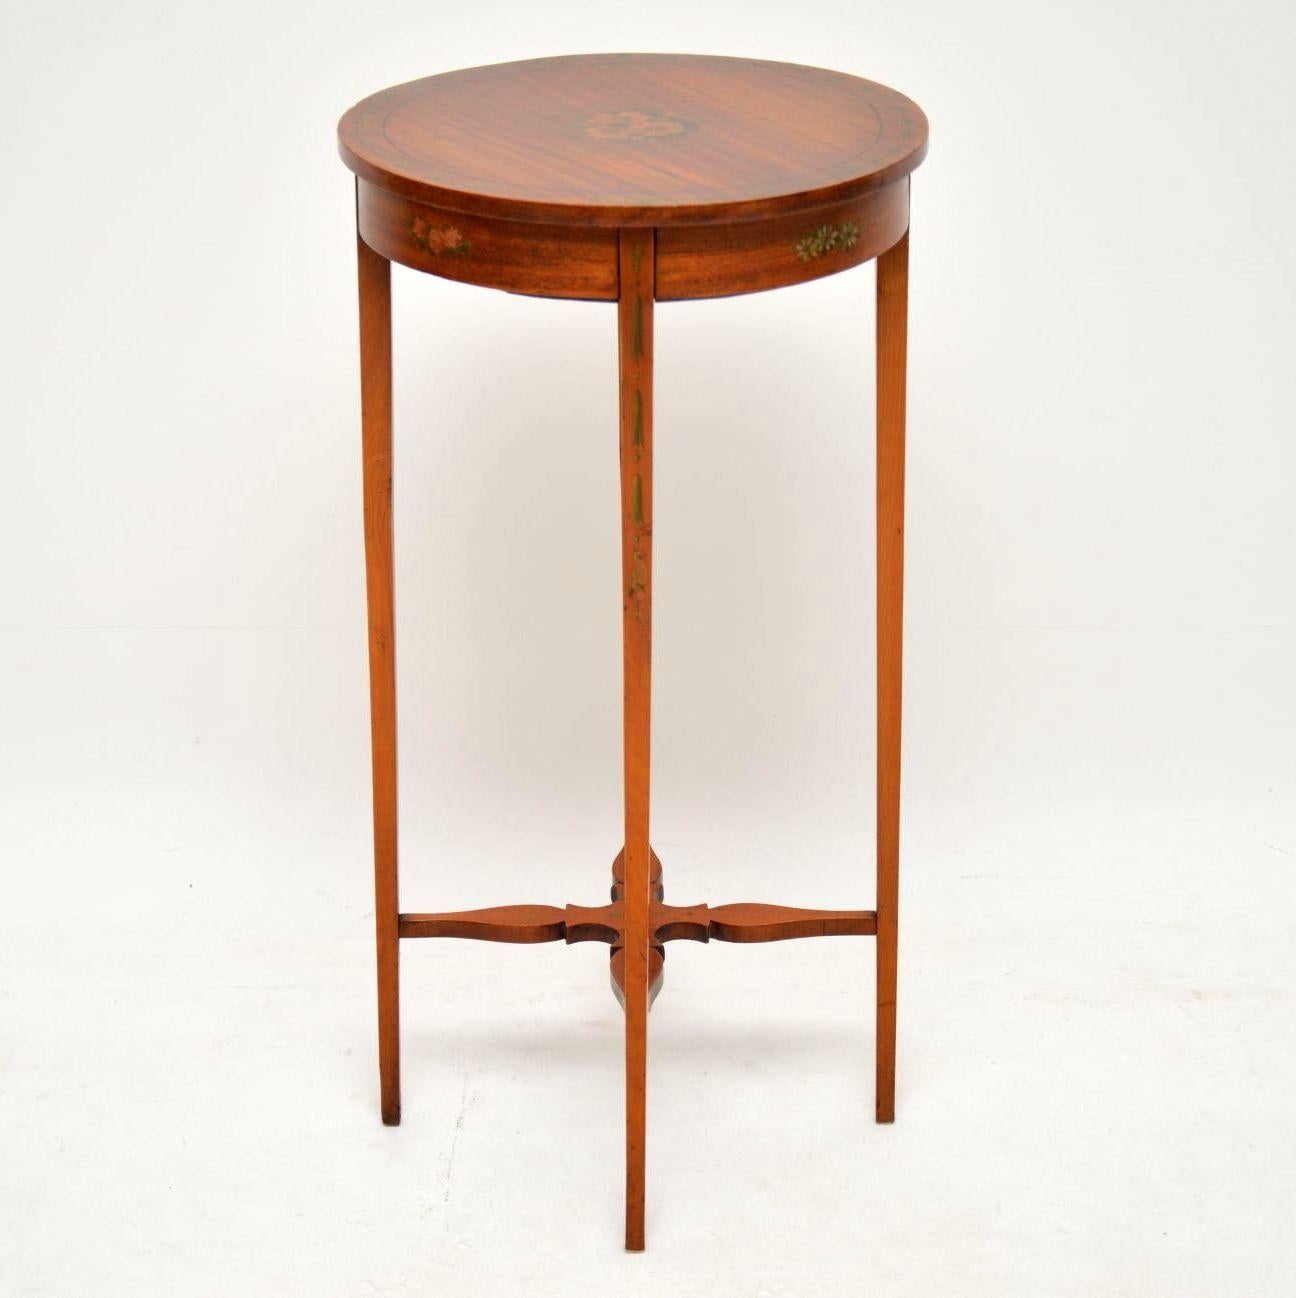 Victorian Antique Edwardian Painted Satin Wood Side Table